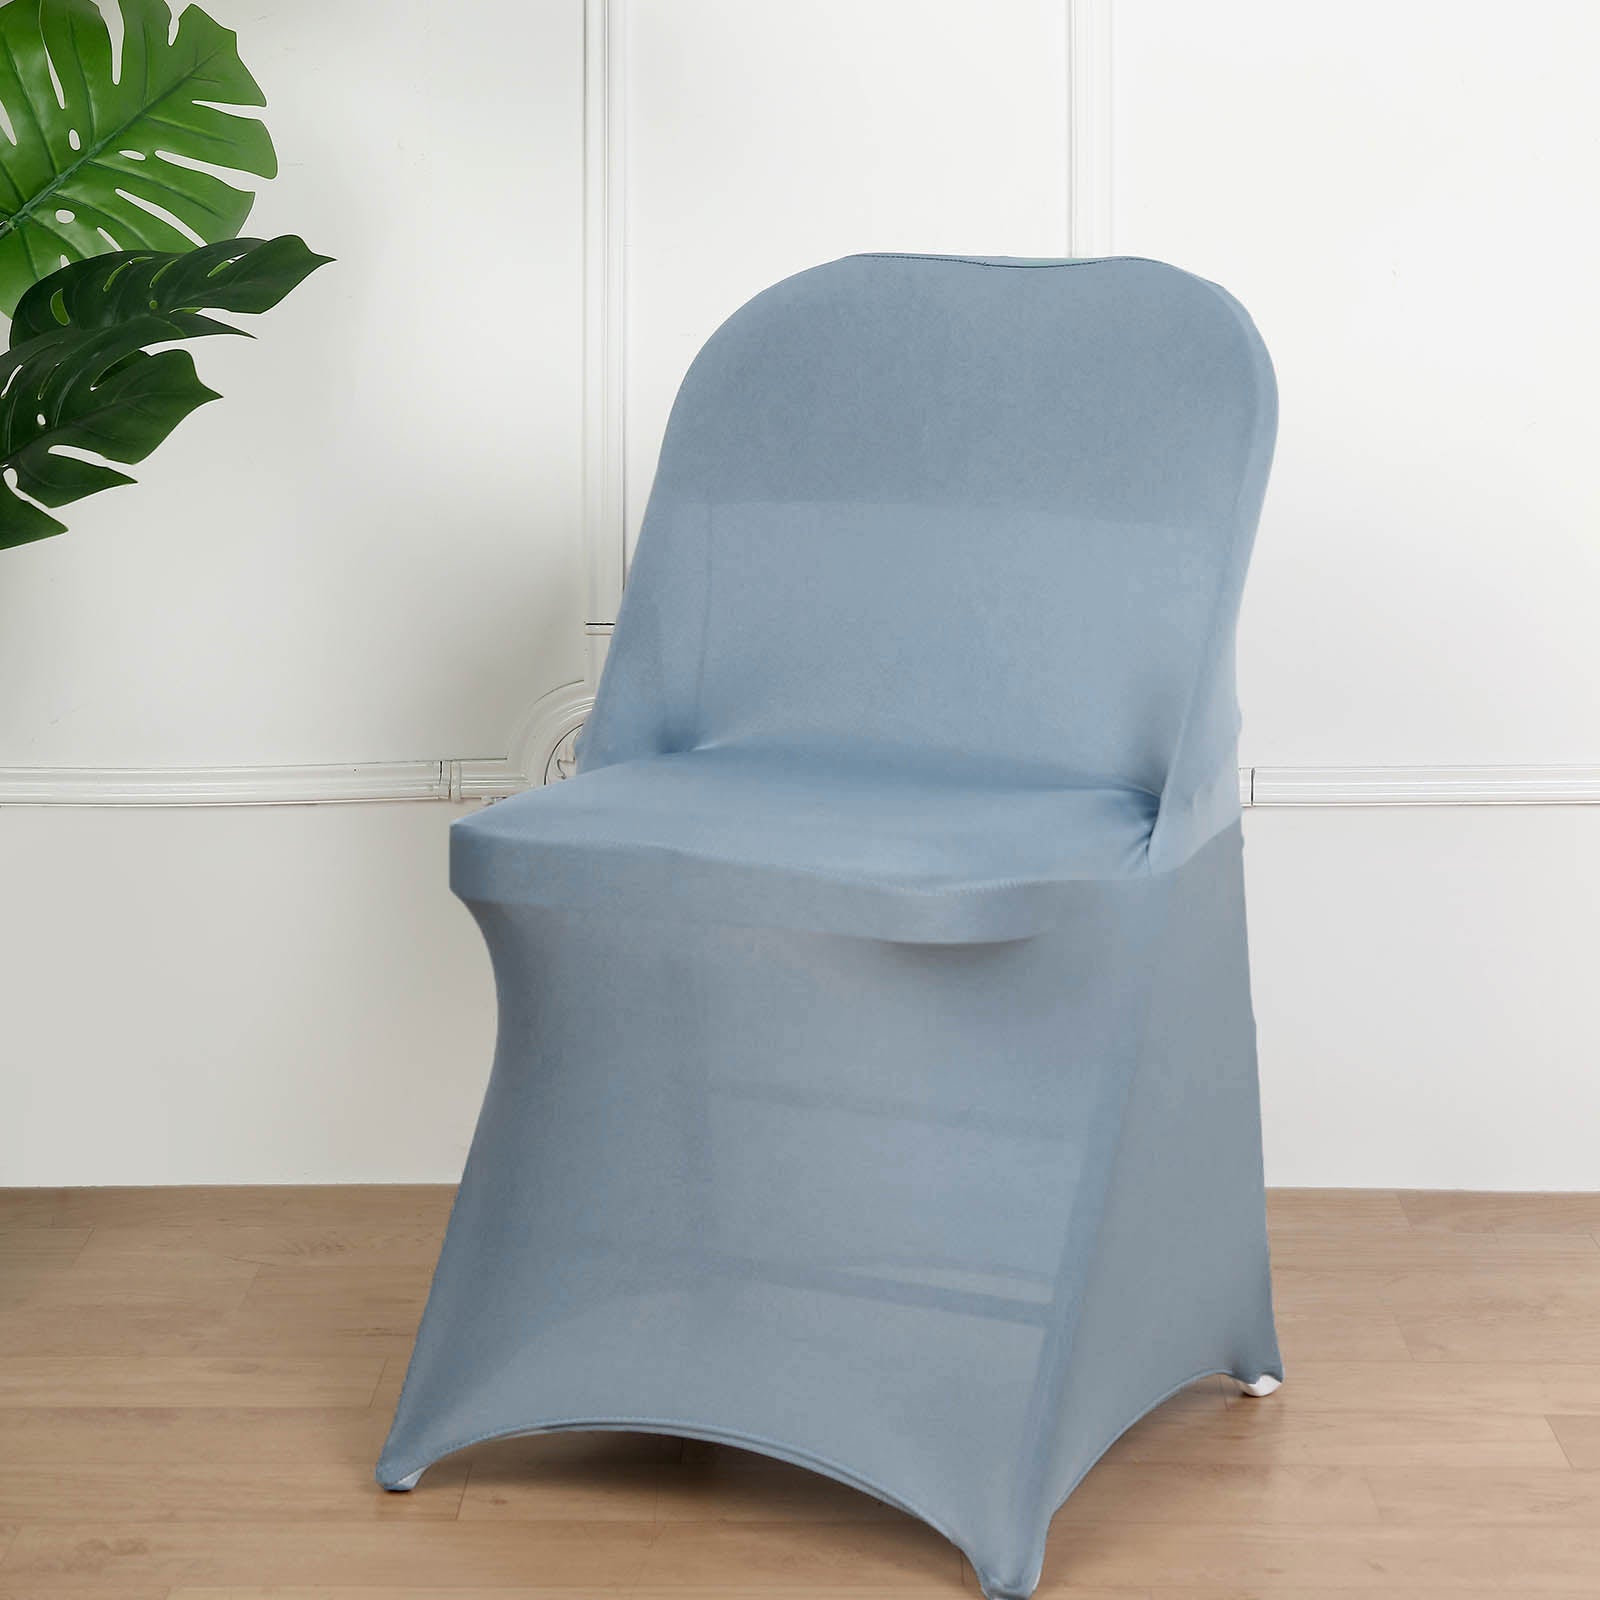 Dusty Blue Spandex Chair Cover